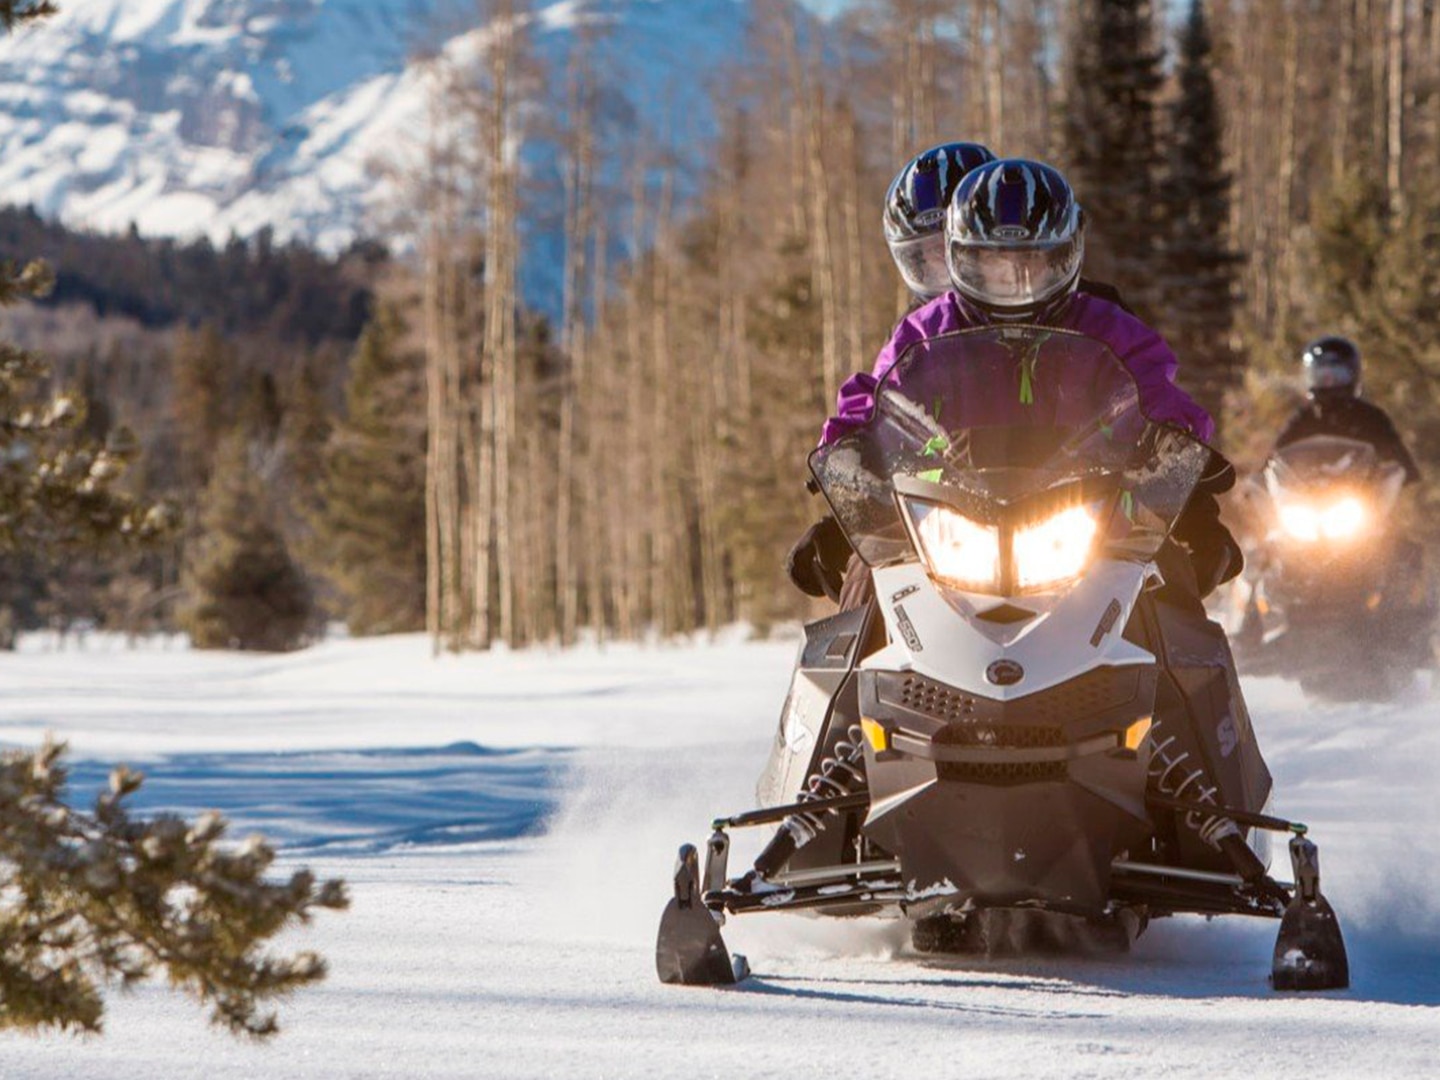 All-inclusive extreme Ski-Doo riding in Kamas, UT